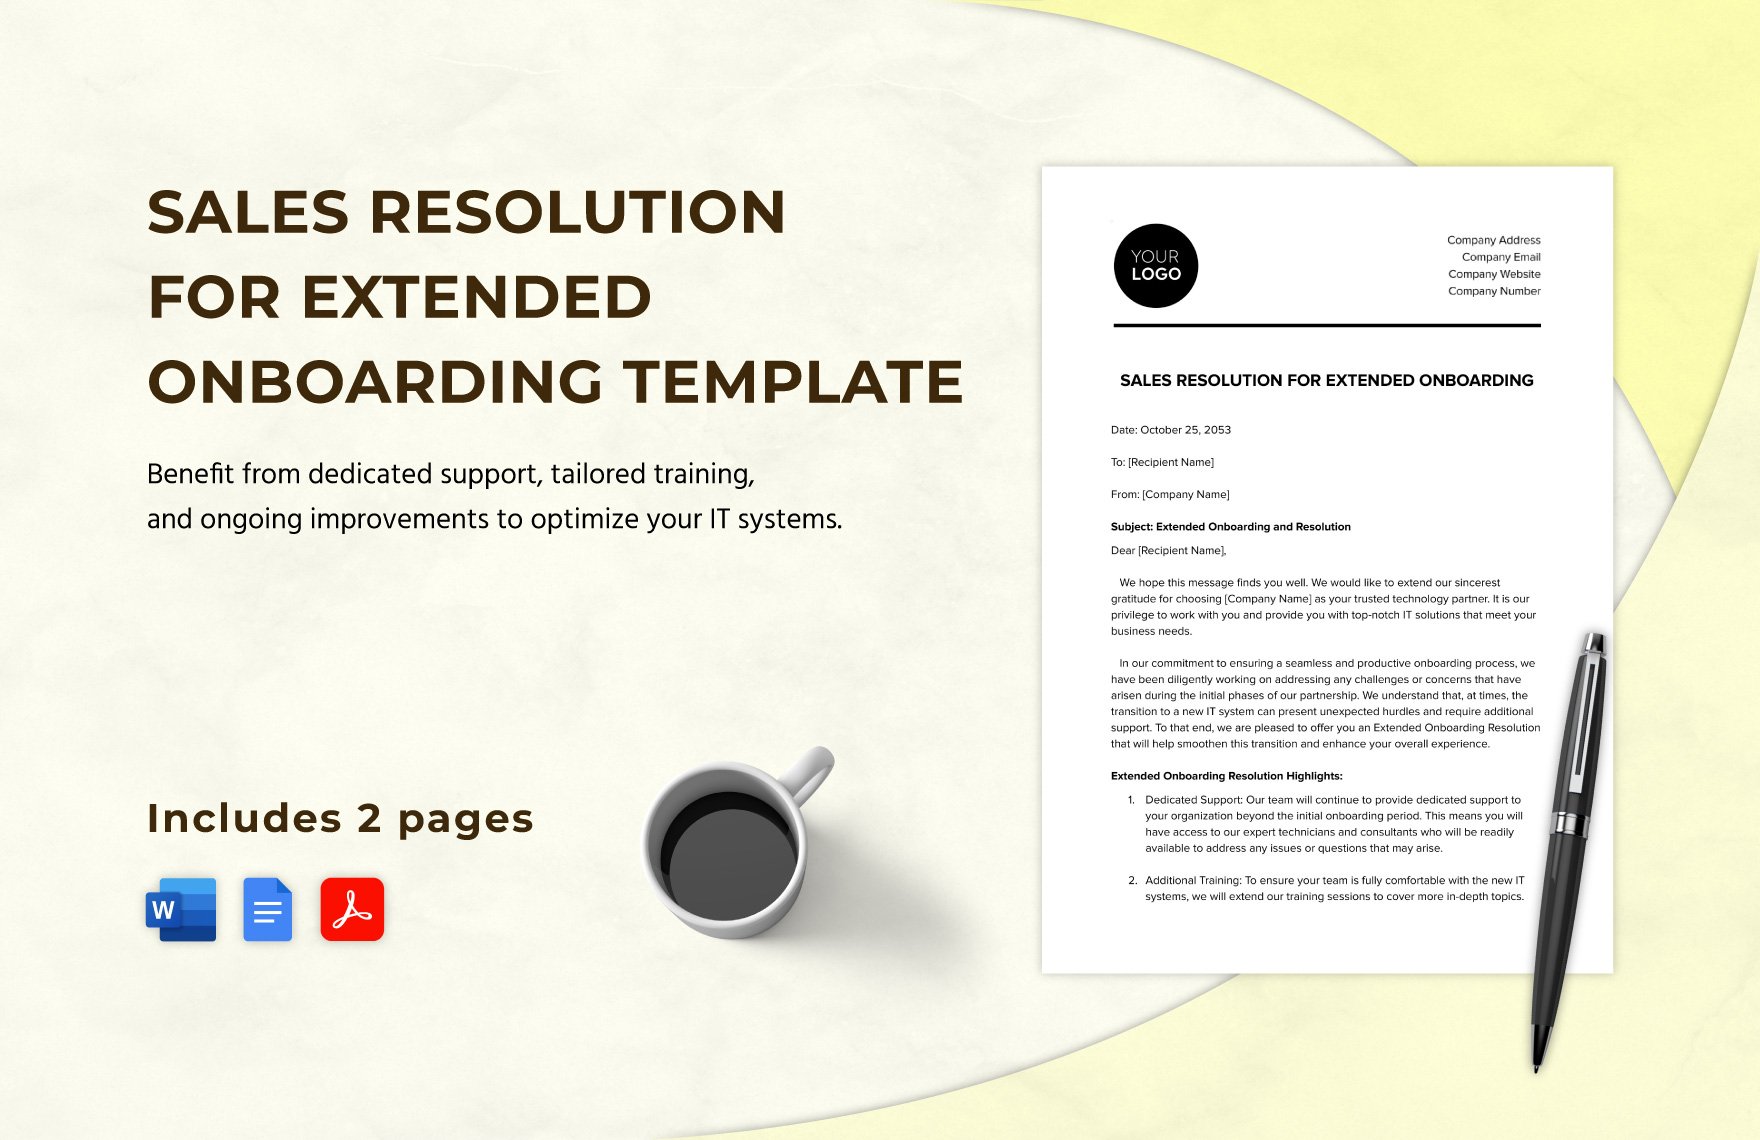 Sales Resolution for Extended Onboarding Template